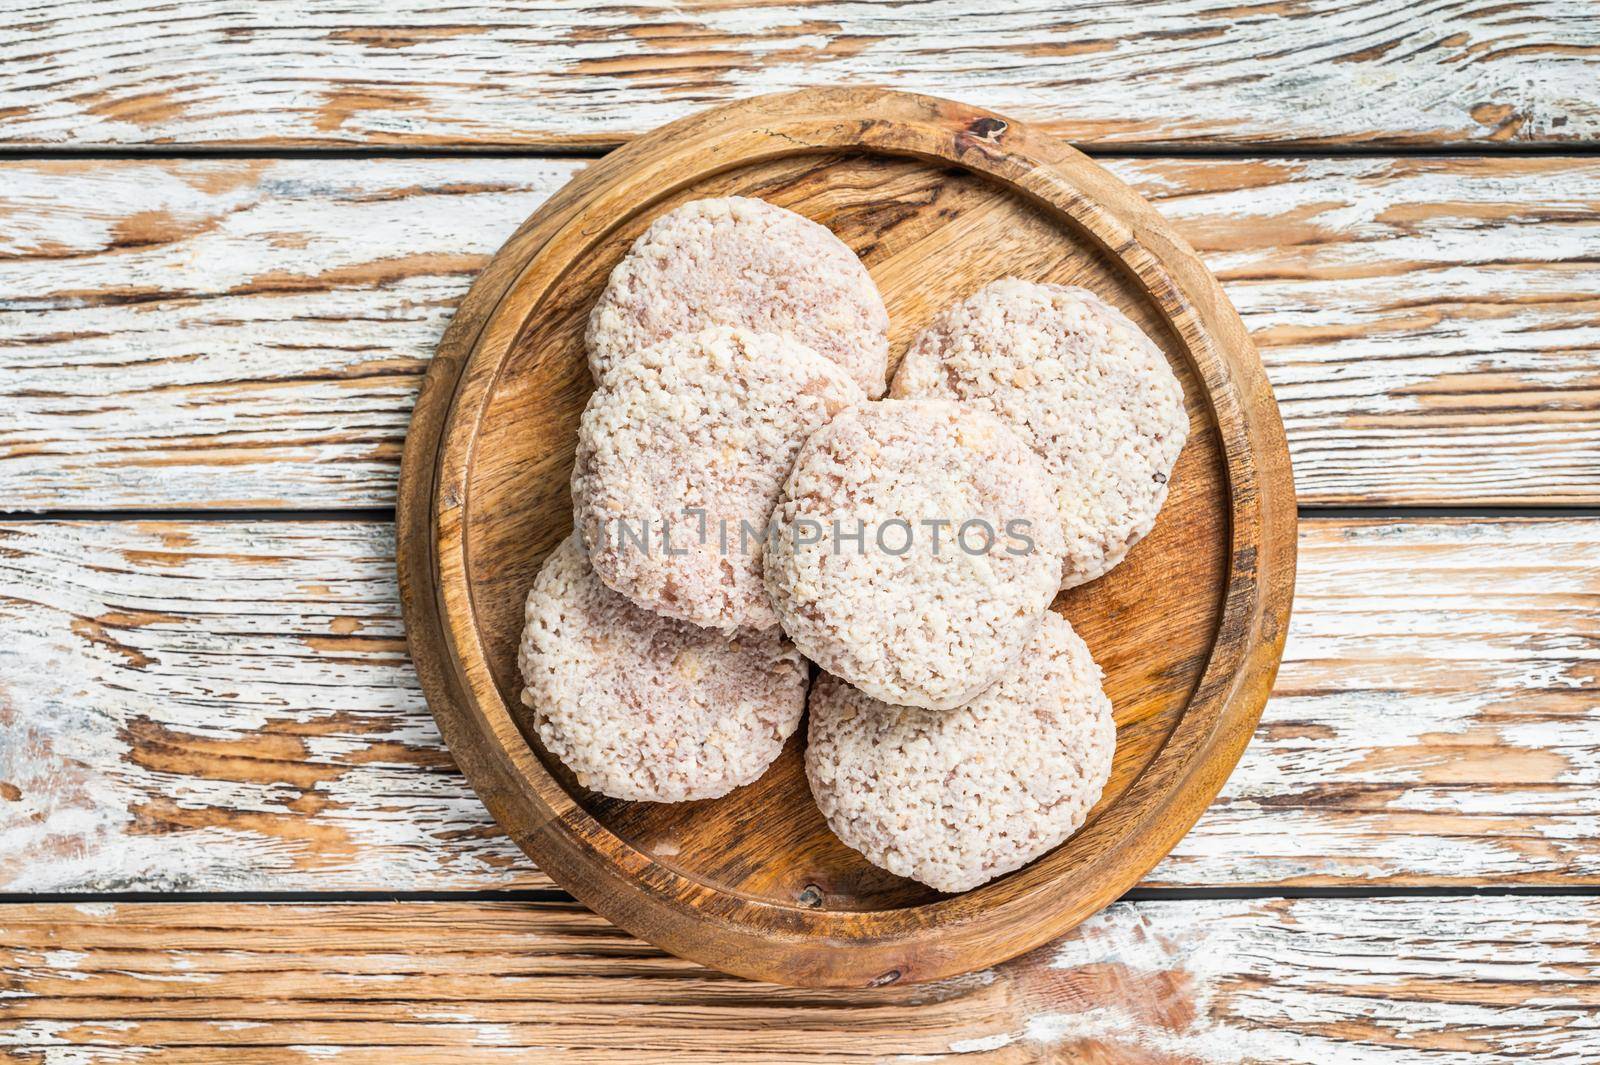 Raw chicken patty cutlet with breadcrumbs. White wooden background. Top view.